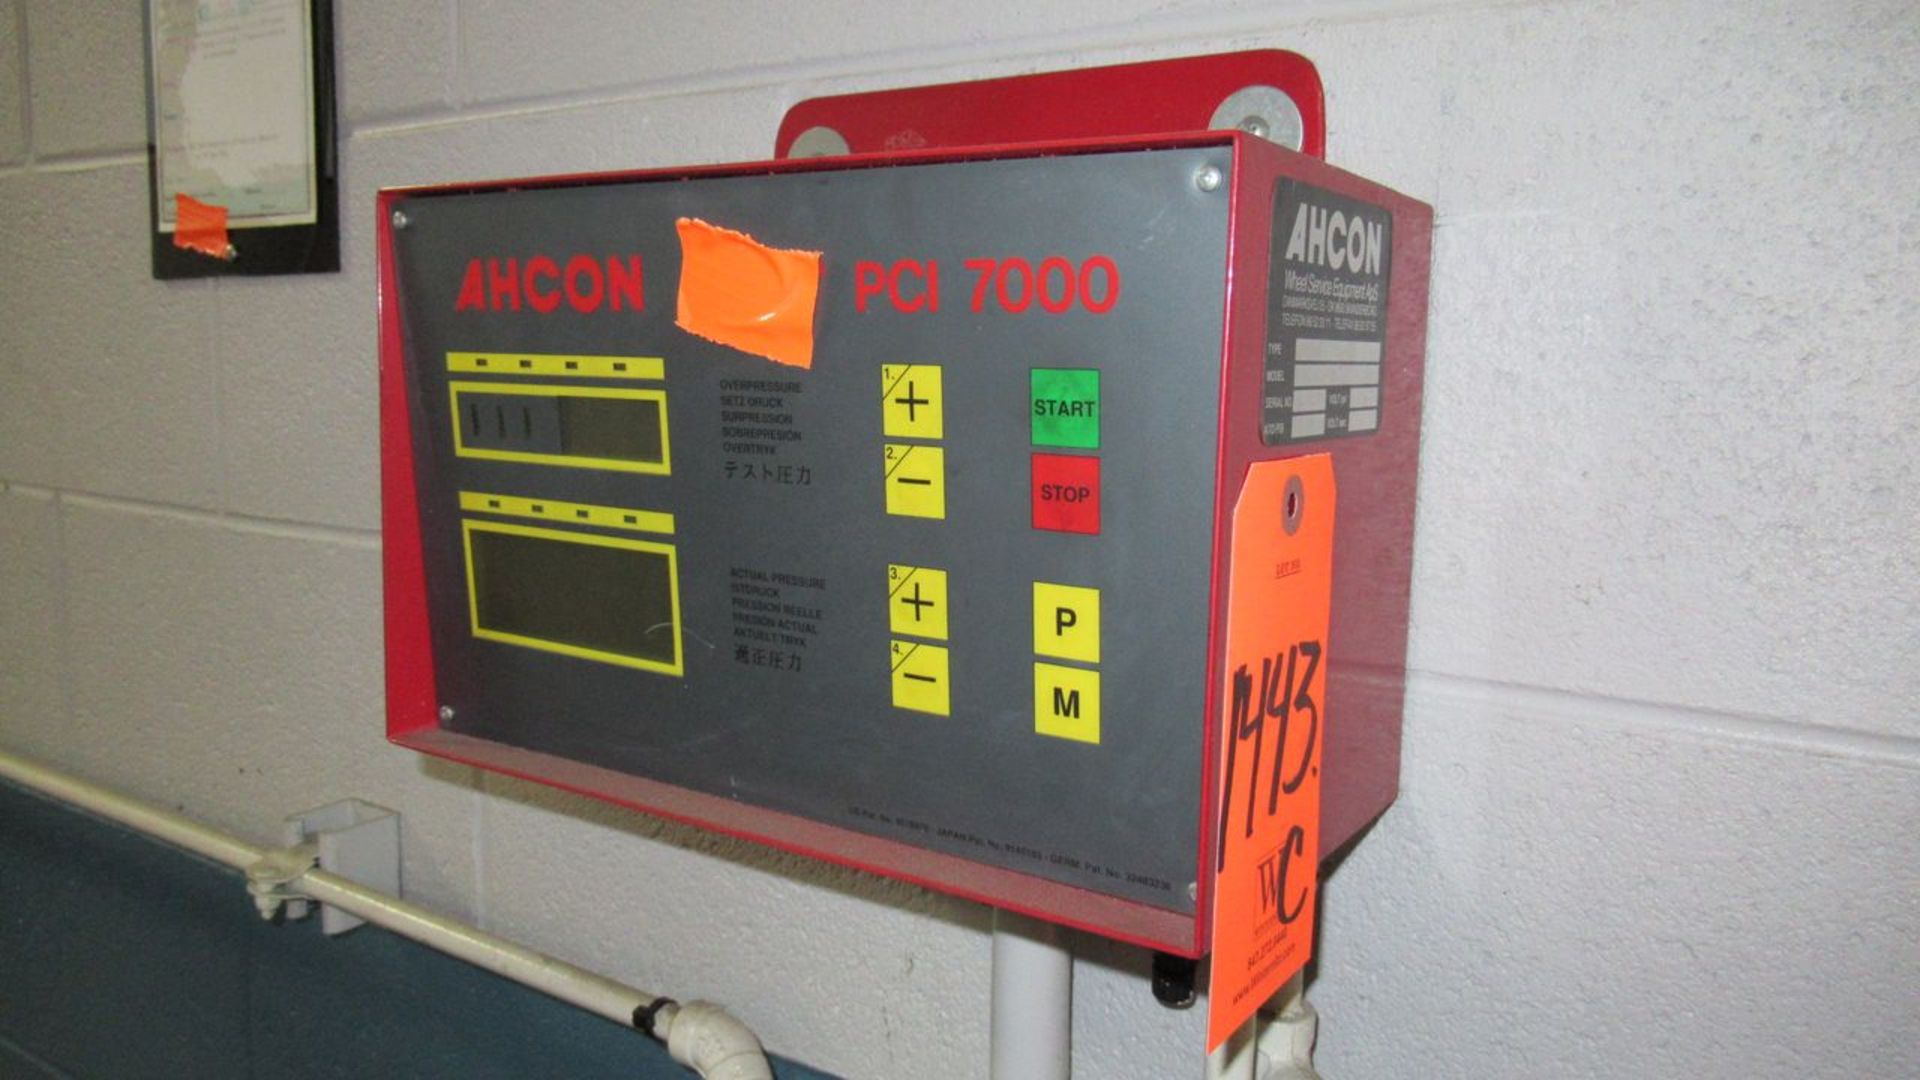 Ahcon PCI-7000 Programmable Computer Inflator, s/n 10.100.378, 145-200 Psi